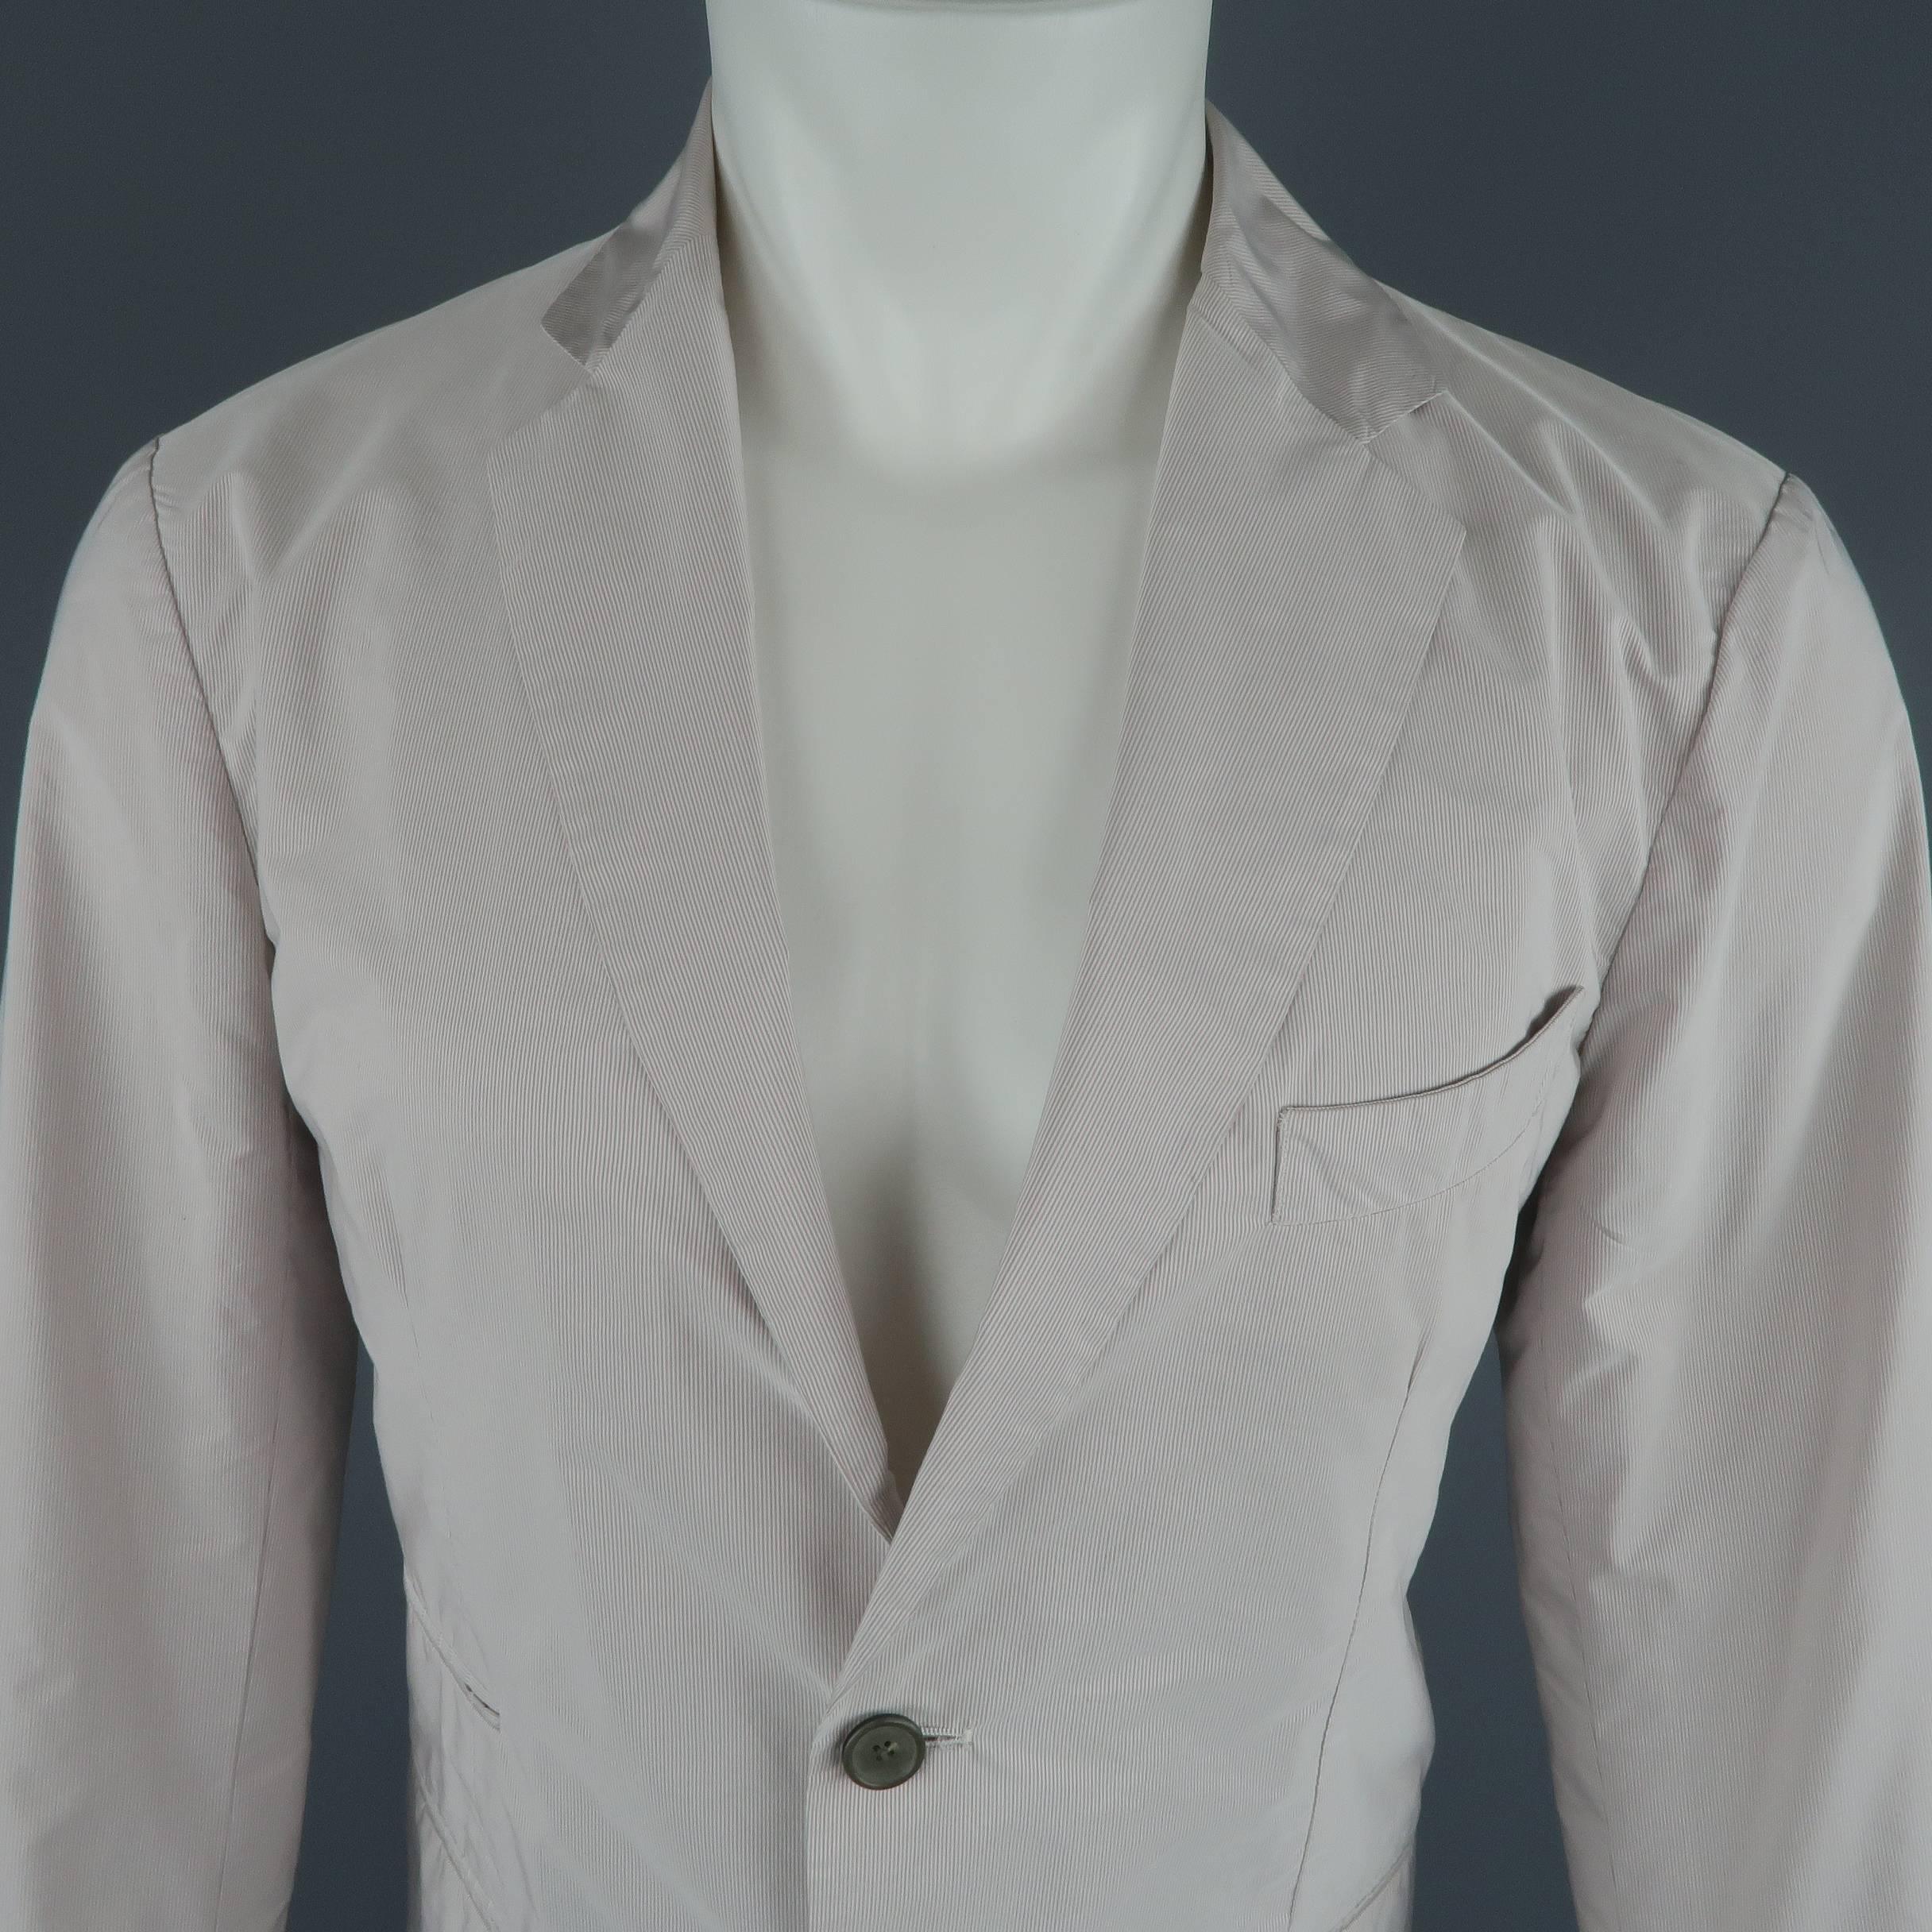 Jil Sander sport coat comes in a light weight beige sporty polyester taffeta material with very faint pink and gray micro stripe pattern, notch lapel, two button front , and slit pockets. Made in Italy.
 
Good Pre-Owned Condition.
Marked: IT 52
